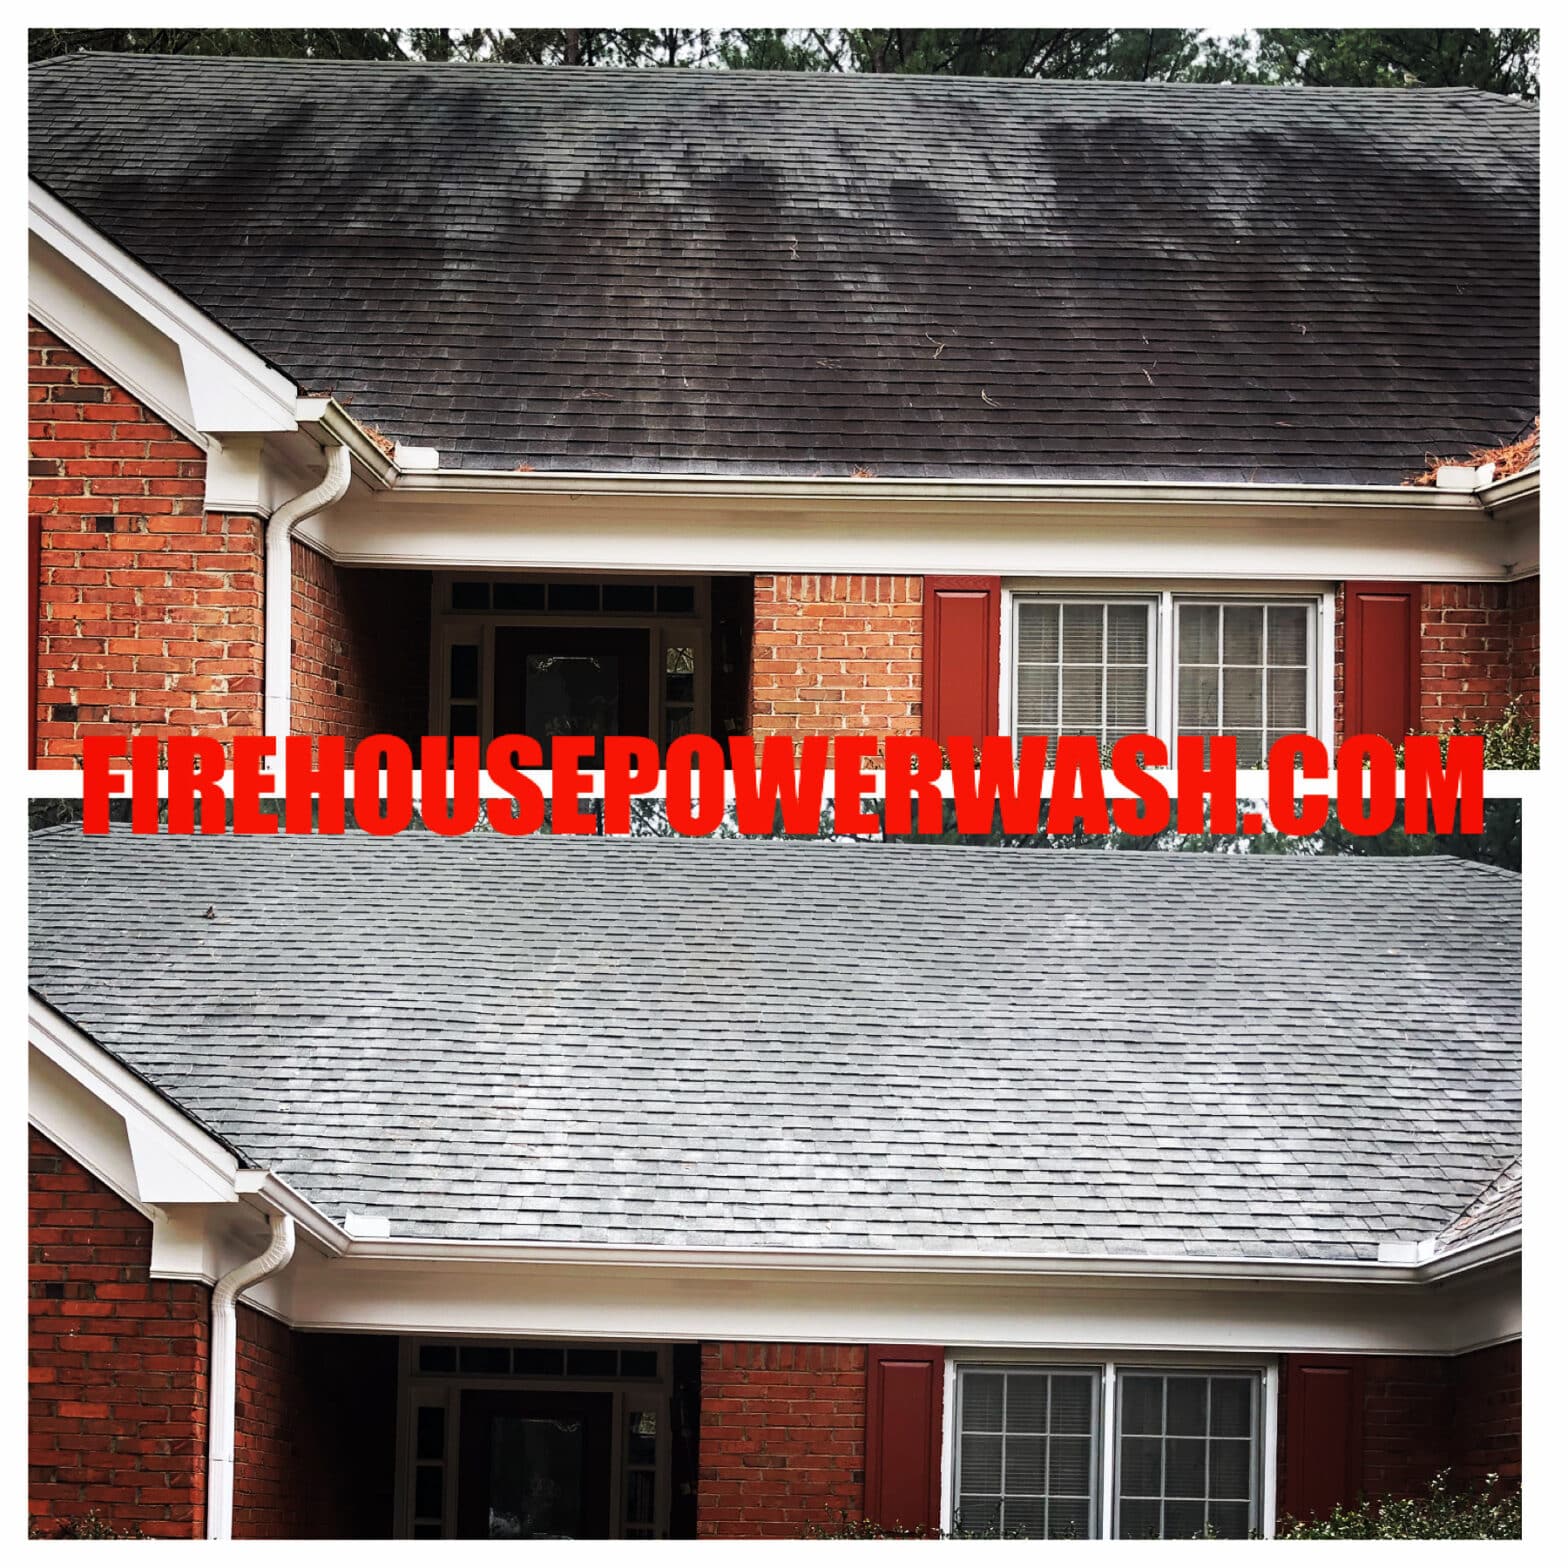 Peachtree-City-Ga-Roof-Cleaning-Firehouse-Pressure-Washing-Soft-Washing-&-Roof-Cleaning